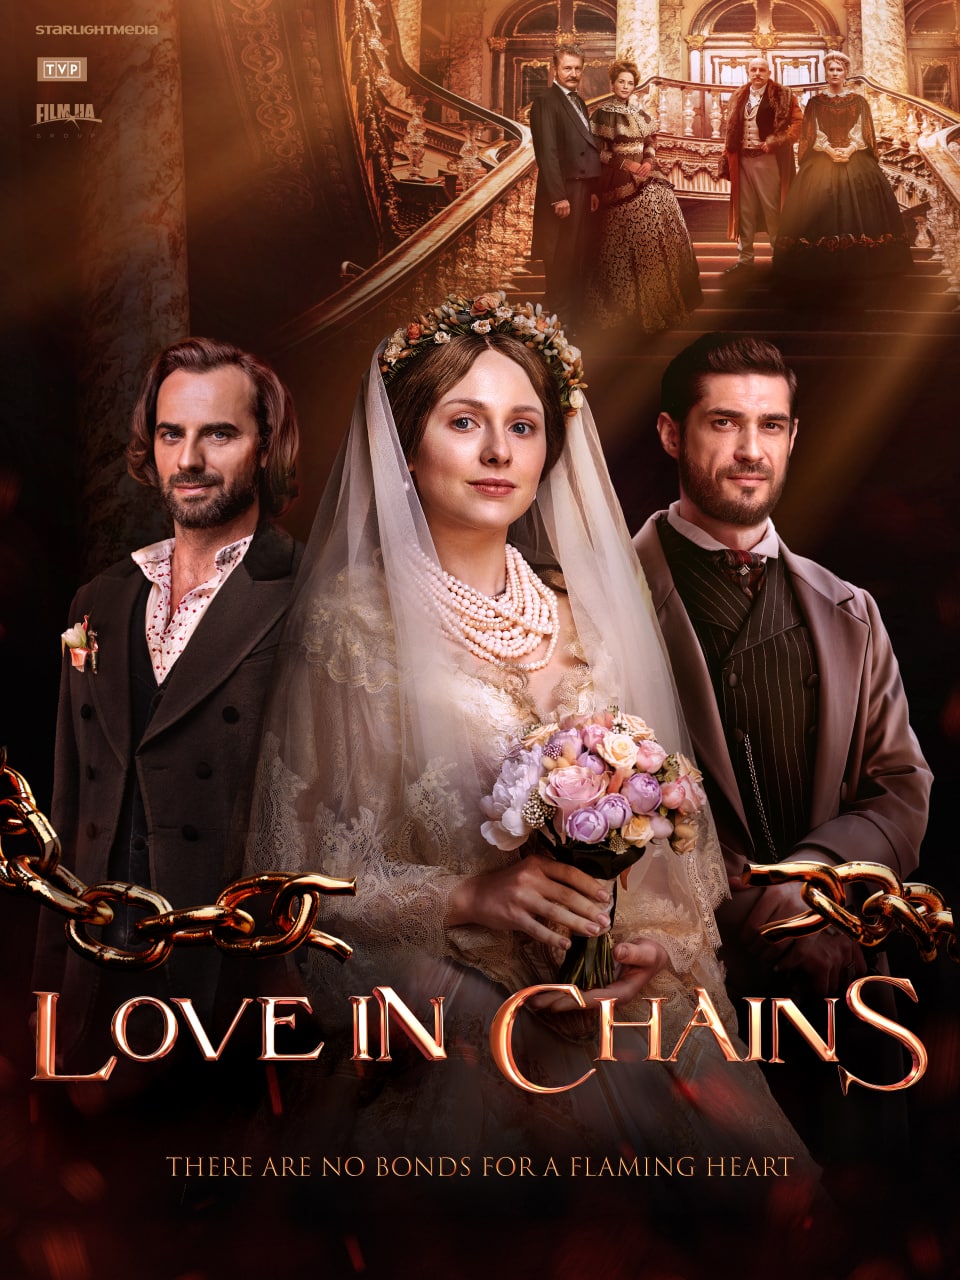 The poster of "Love in chains", screenwriter